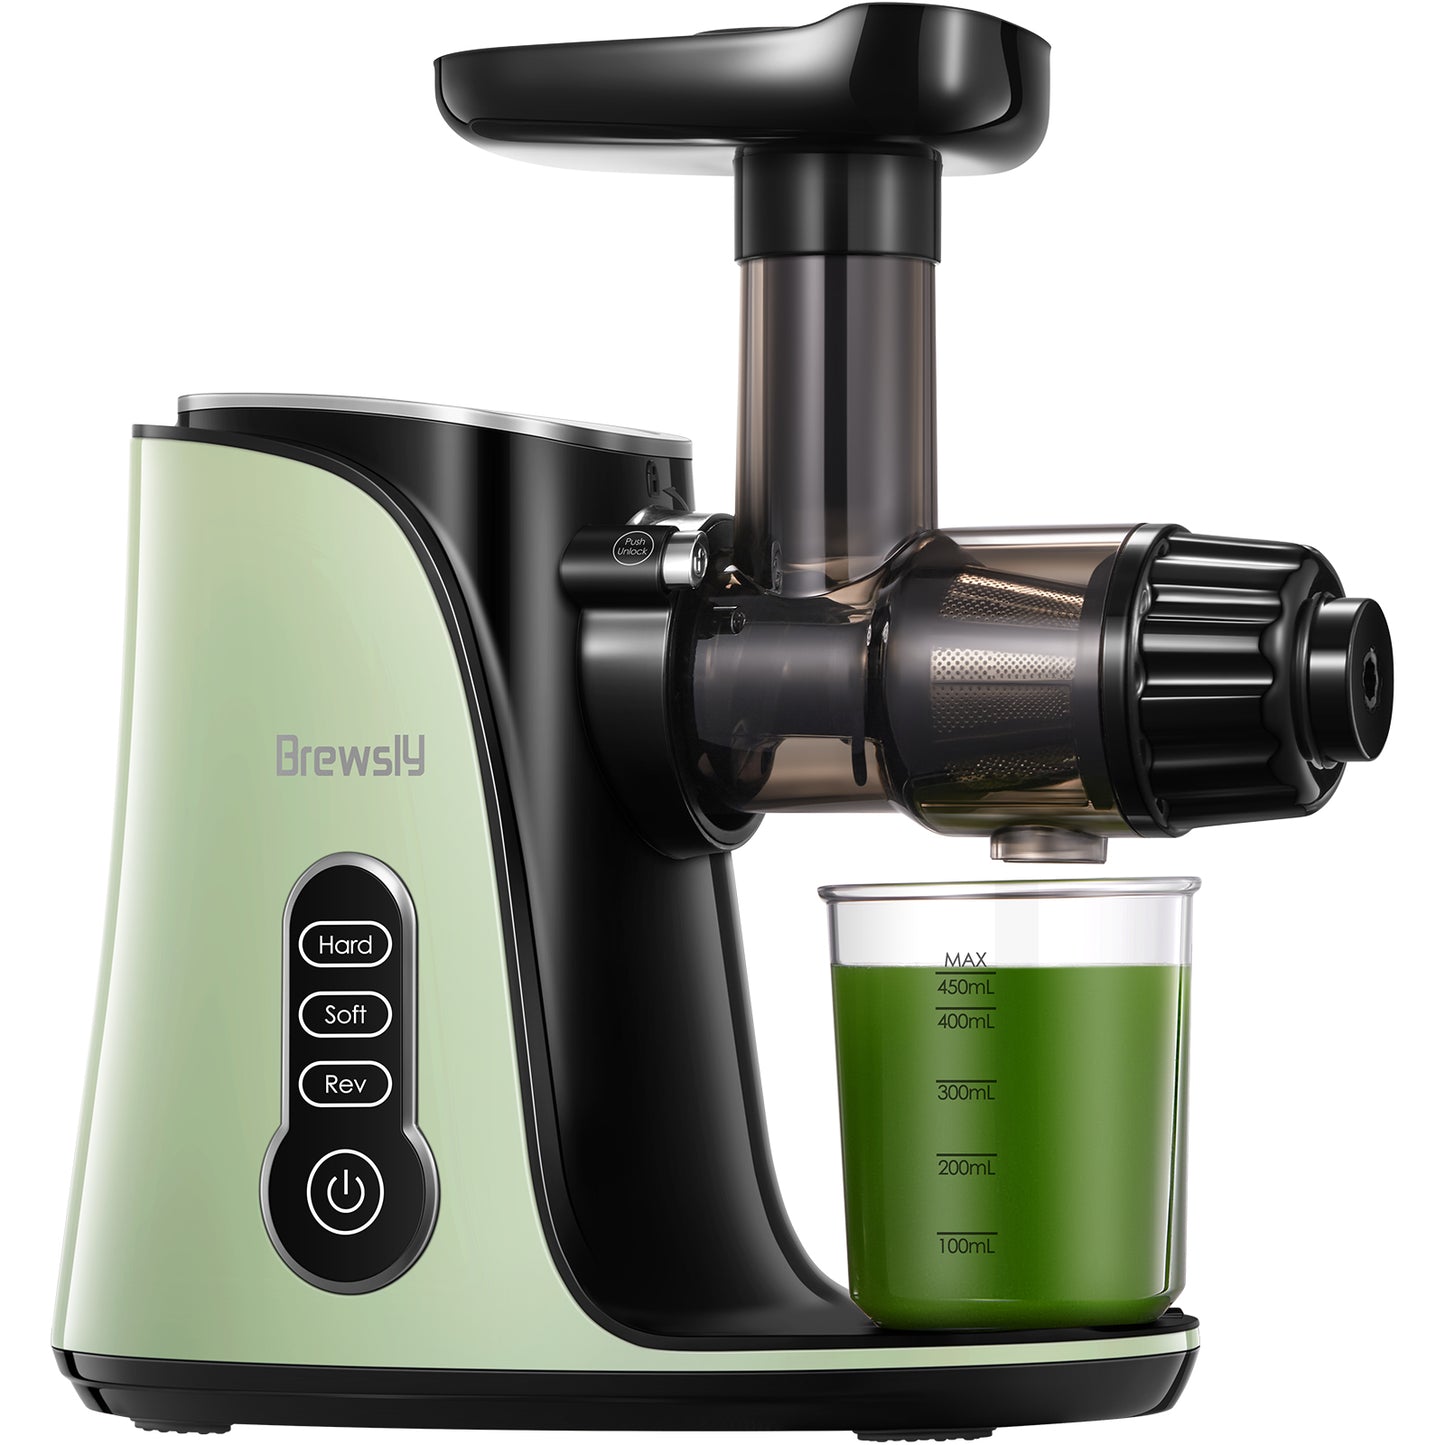 Juicer Machines, Slow Masticating Juicer Extractor with 3-Mode 2-Speed, Cold Press Juicer Easy to Clean, Quiet Motor & Reverse Function, Juice Recipes for Vegetables and Fruits, Green